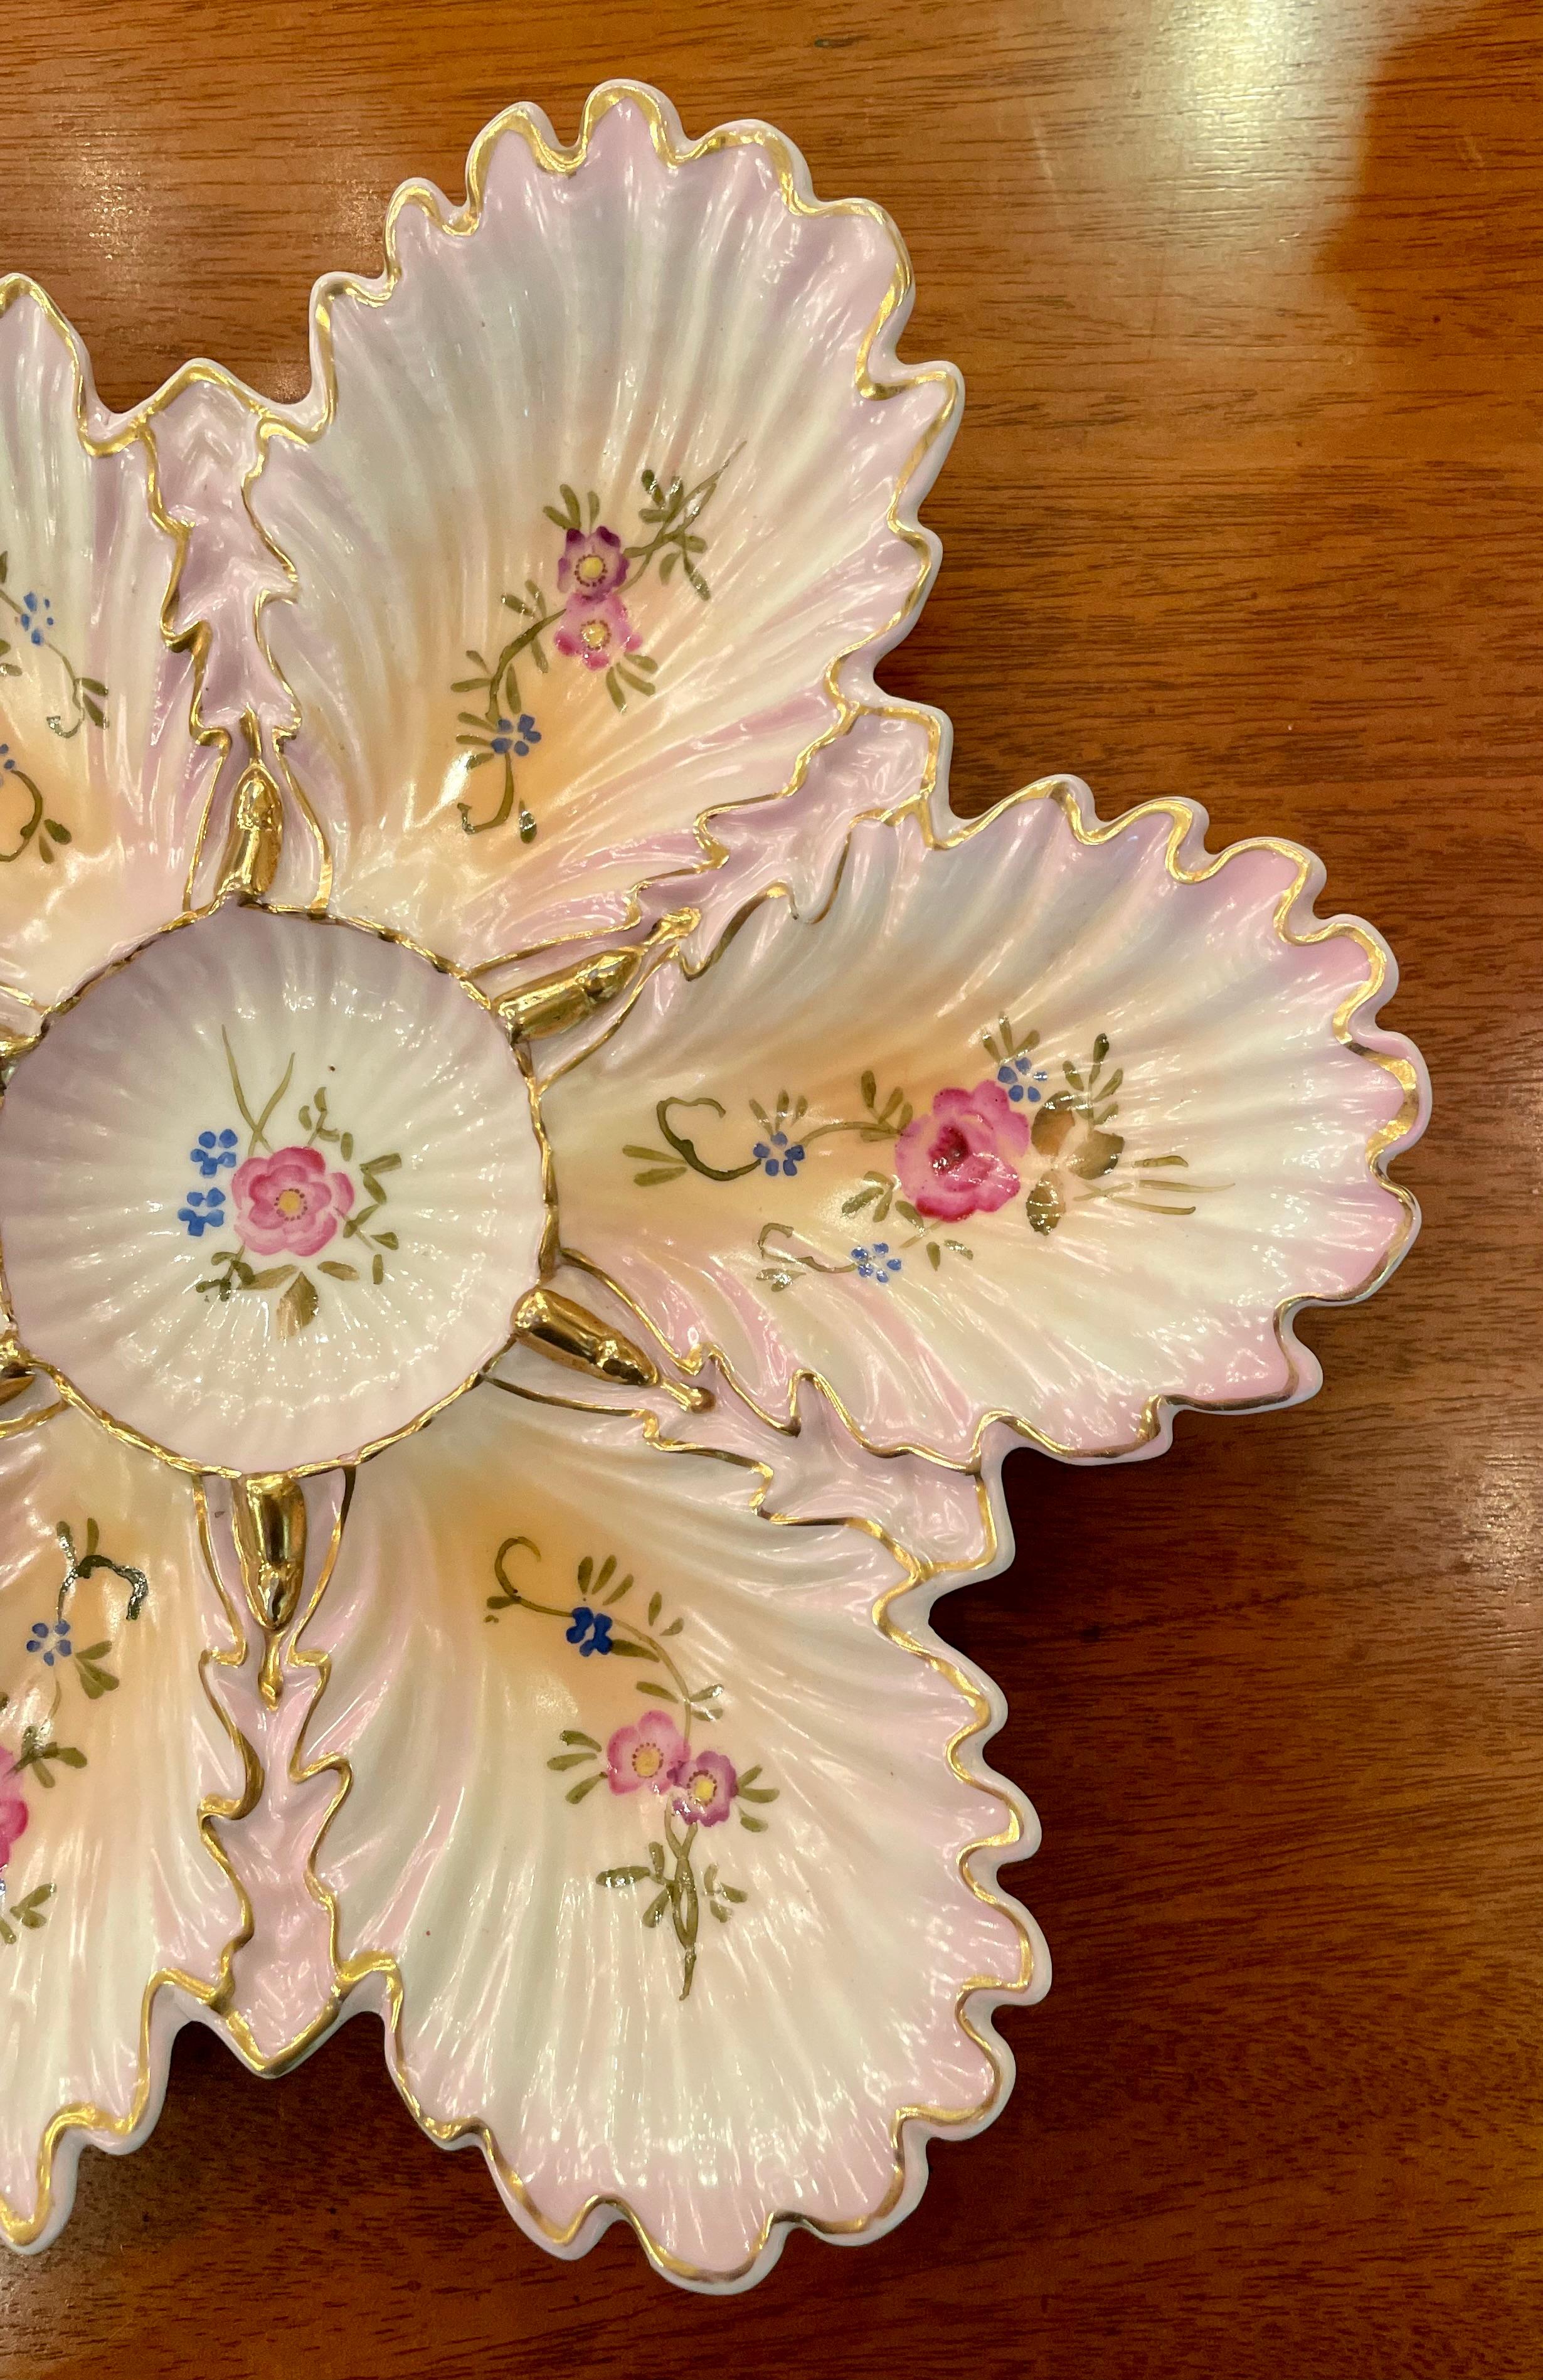 Antique Continental Pink & gold porcelain shaped oyster plate with Ruffled Edges, Circa 1880's.
Pretty hand-painting detail of pink florals and trailing vines.